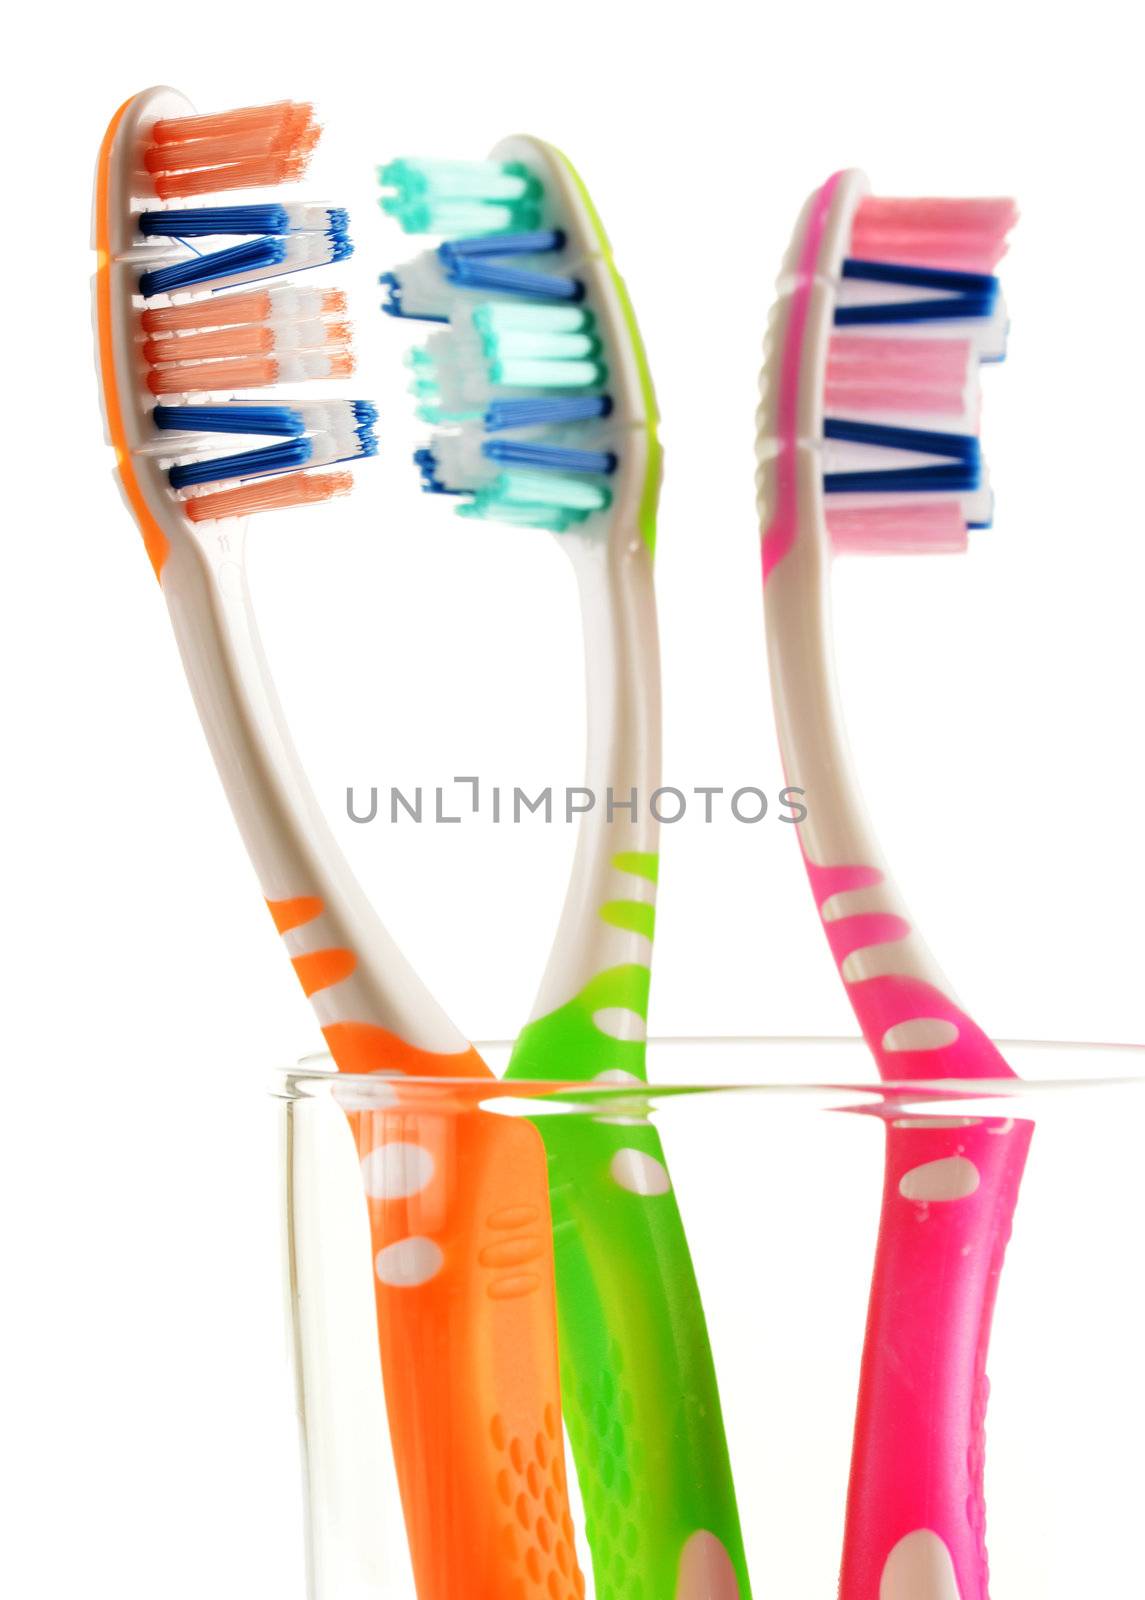 Composition with toothbrushes isolated on white background